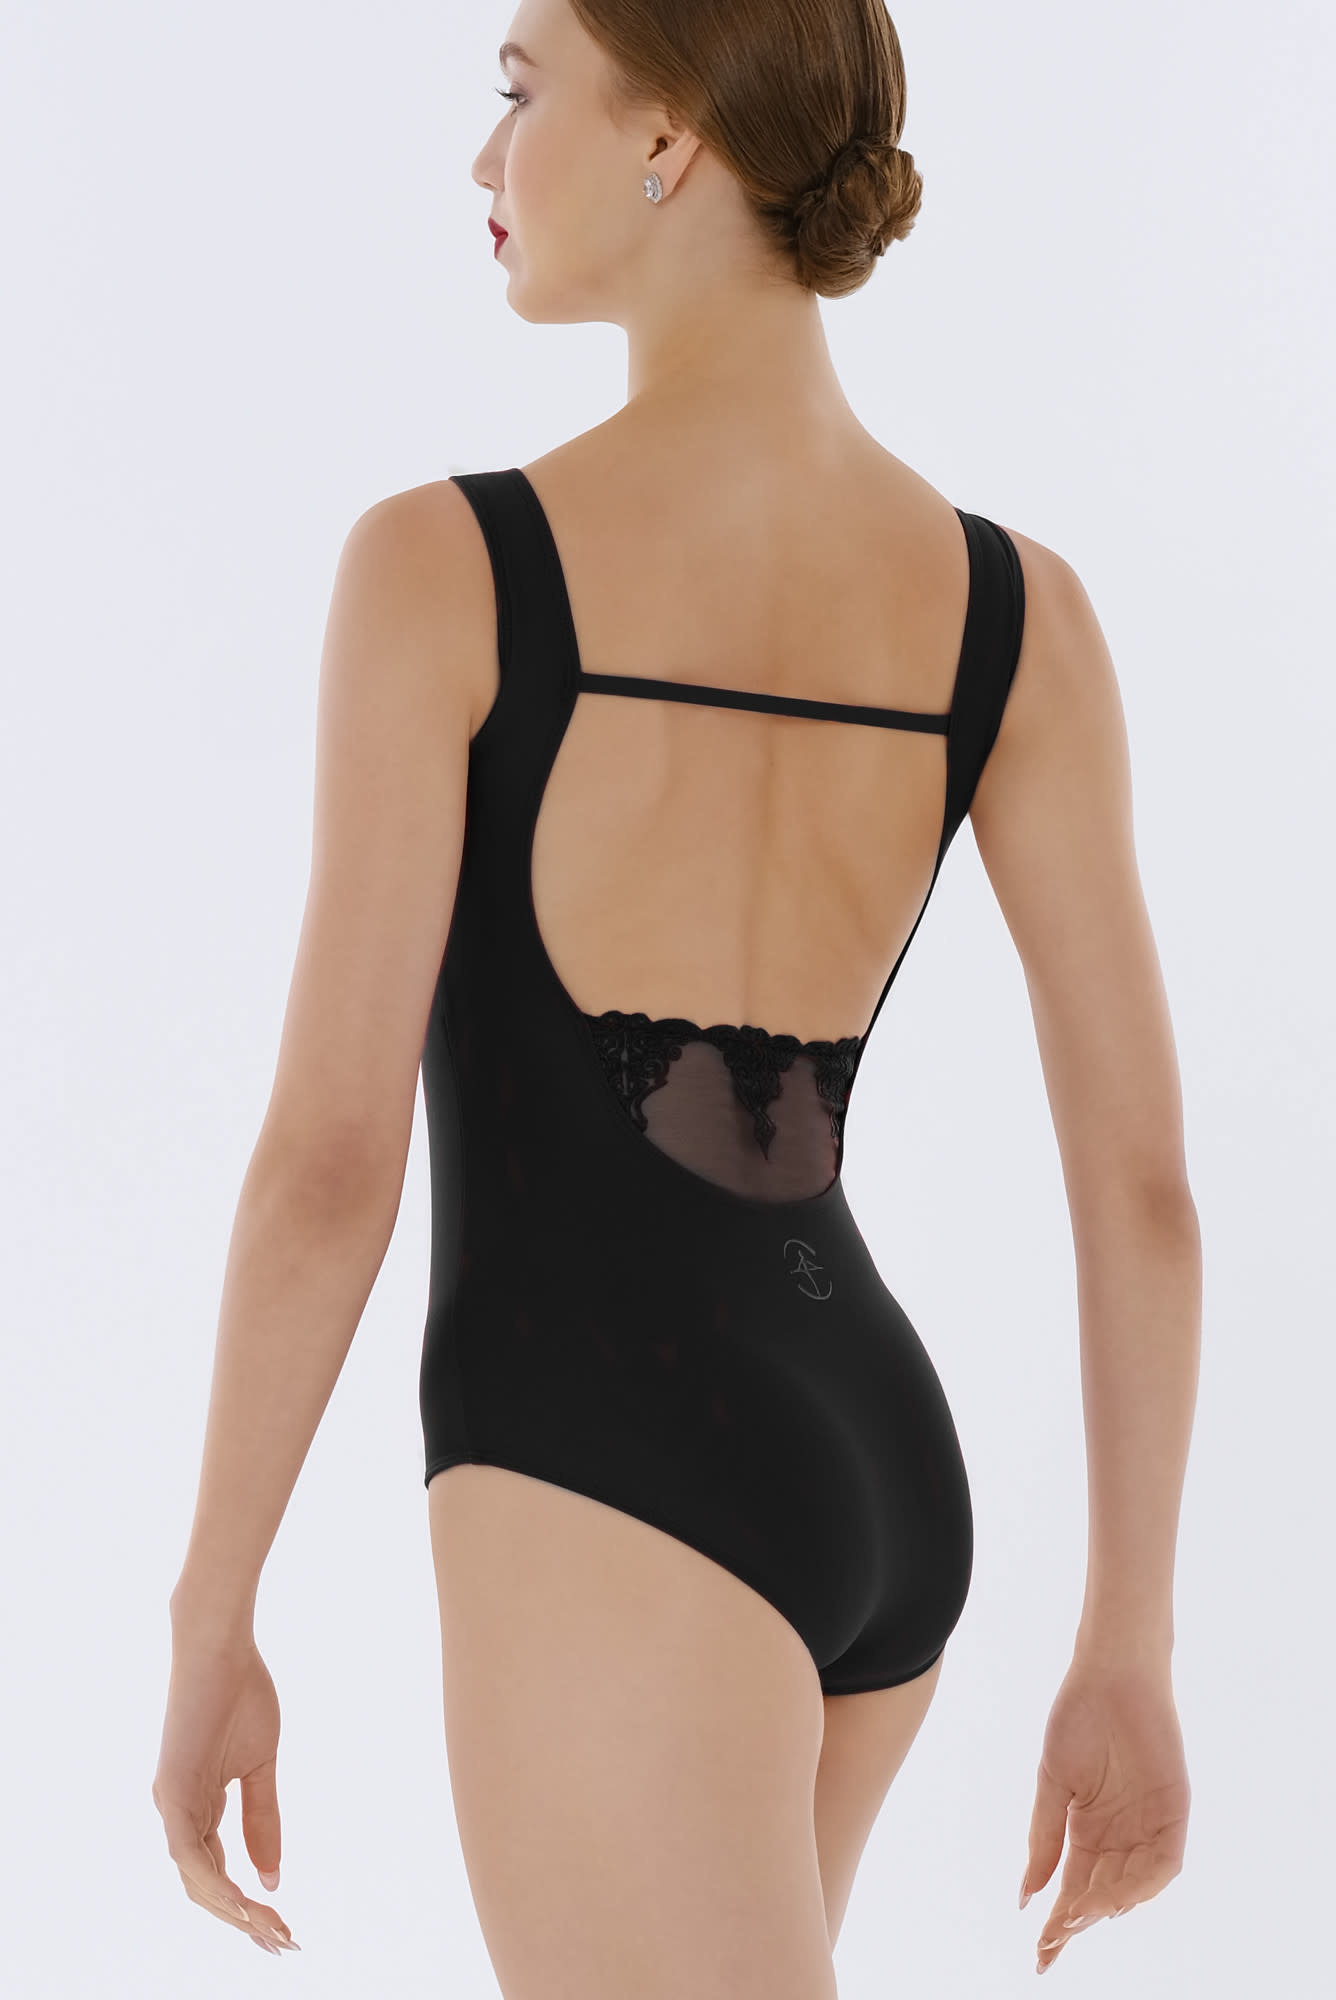 Wear Moi BELLE-Embroidered Stretch Tulle Leotard-BLACK